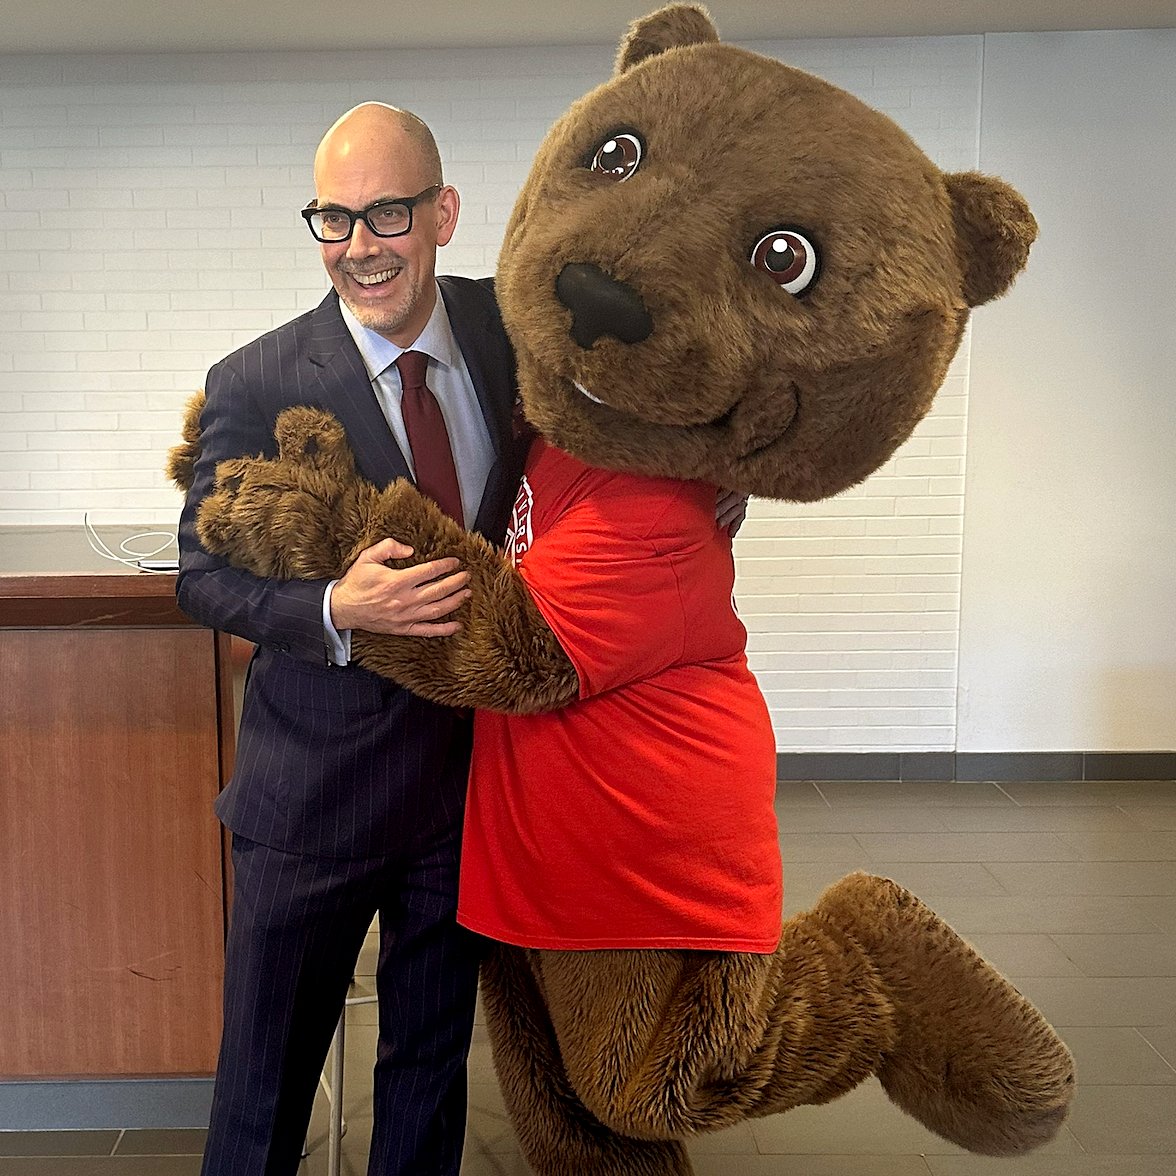 Last week, the Cornell Law Community came together to support the next generation of Cornell lawyers. Thank you to all who gave. Another successful #CornellGivingDay! Here's a pic of Dean Ohlin and everyone's favorite, Touchdown the Bear!